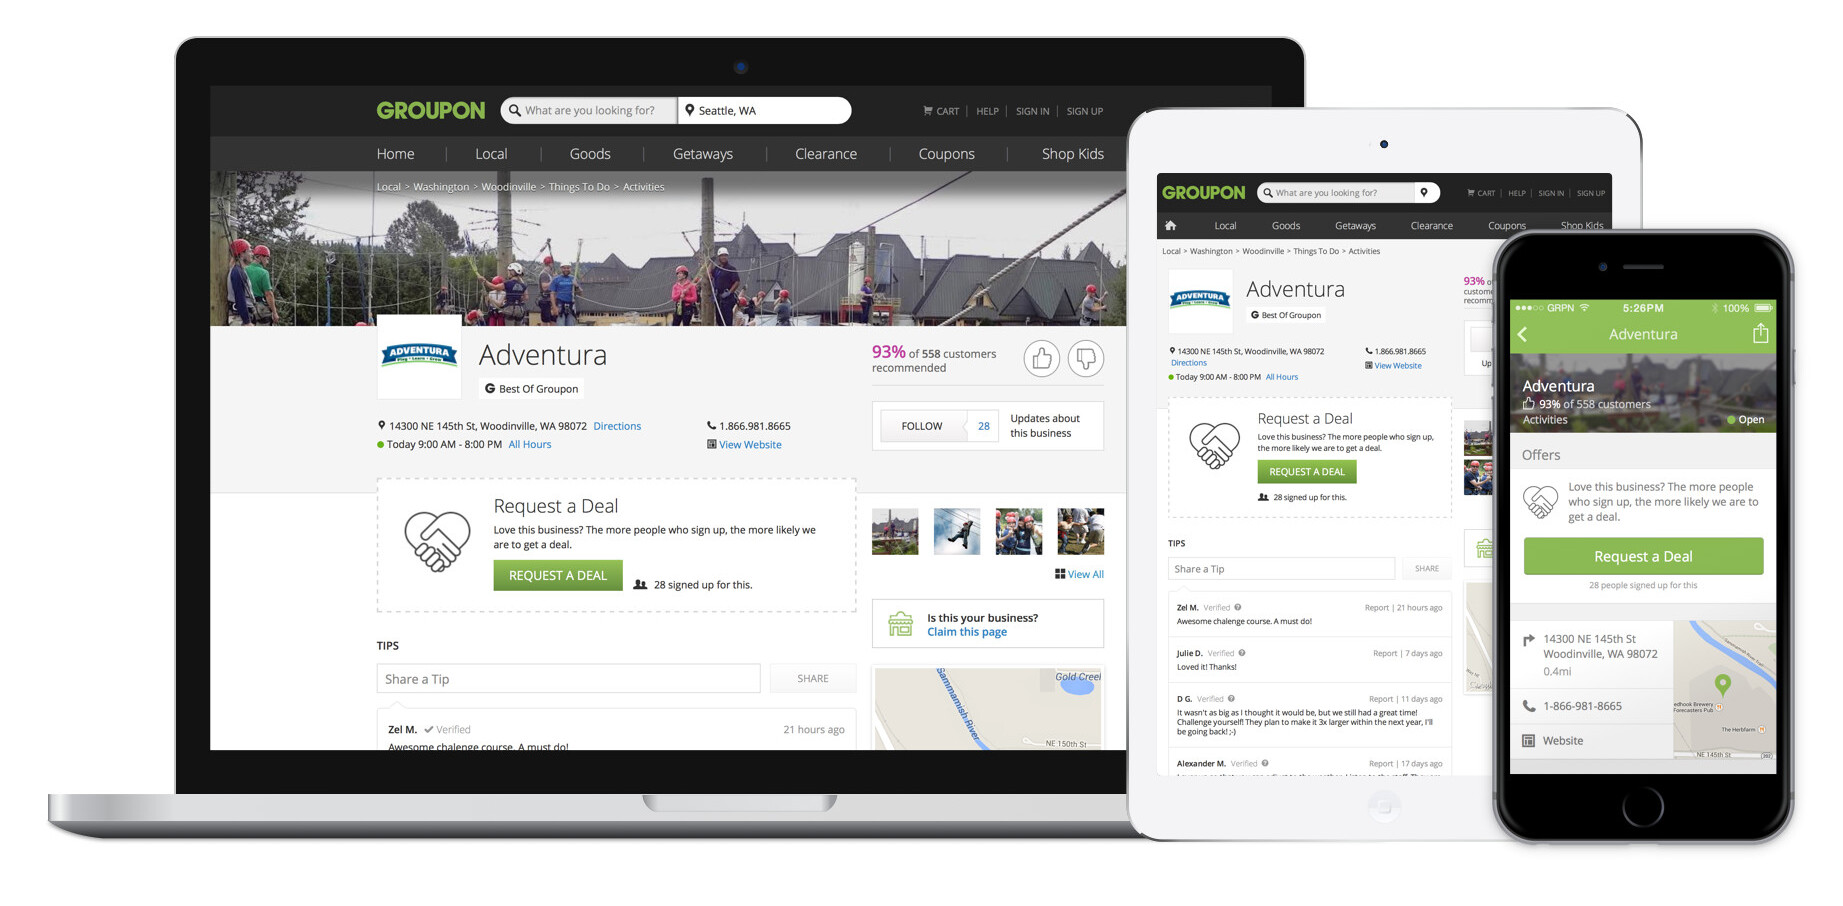 Groupon’s site now has dedicated pages for 7 million businesses across the US